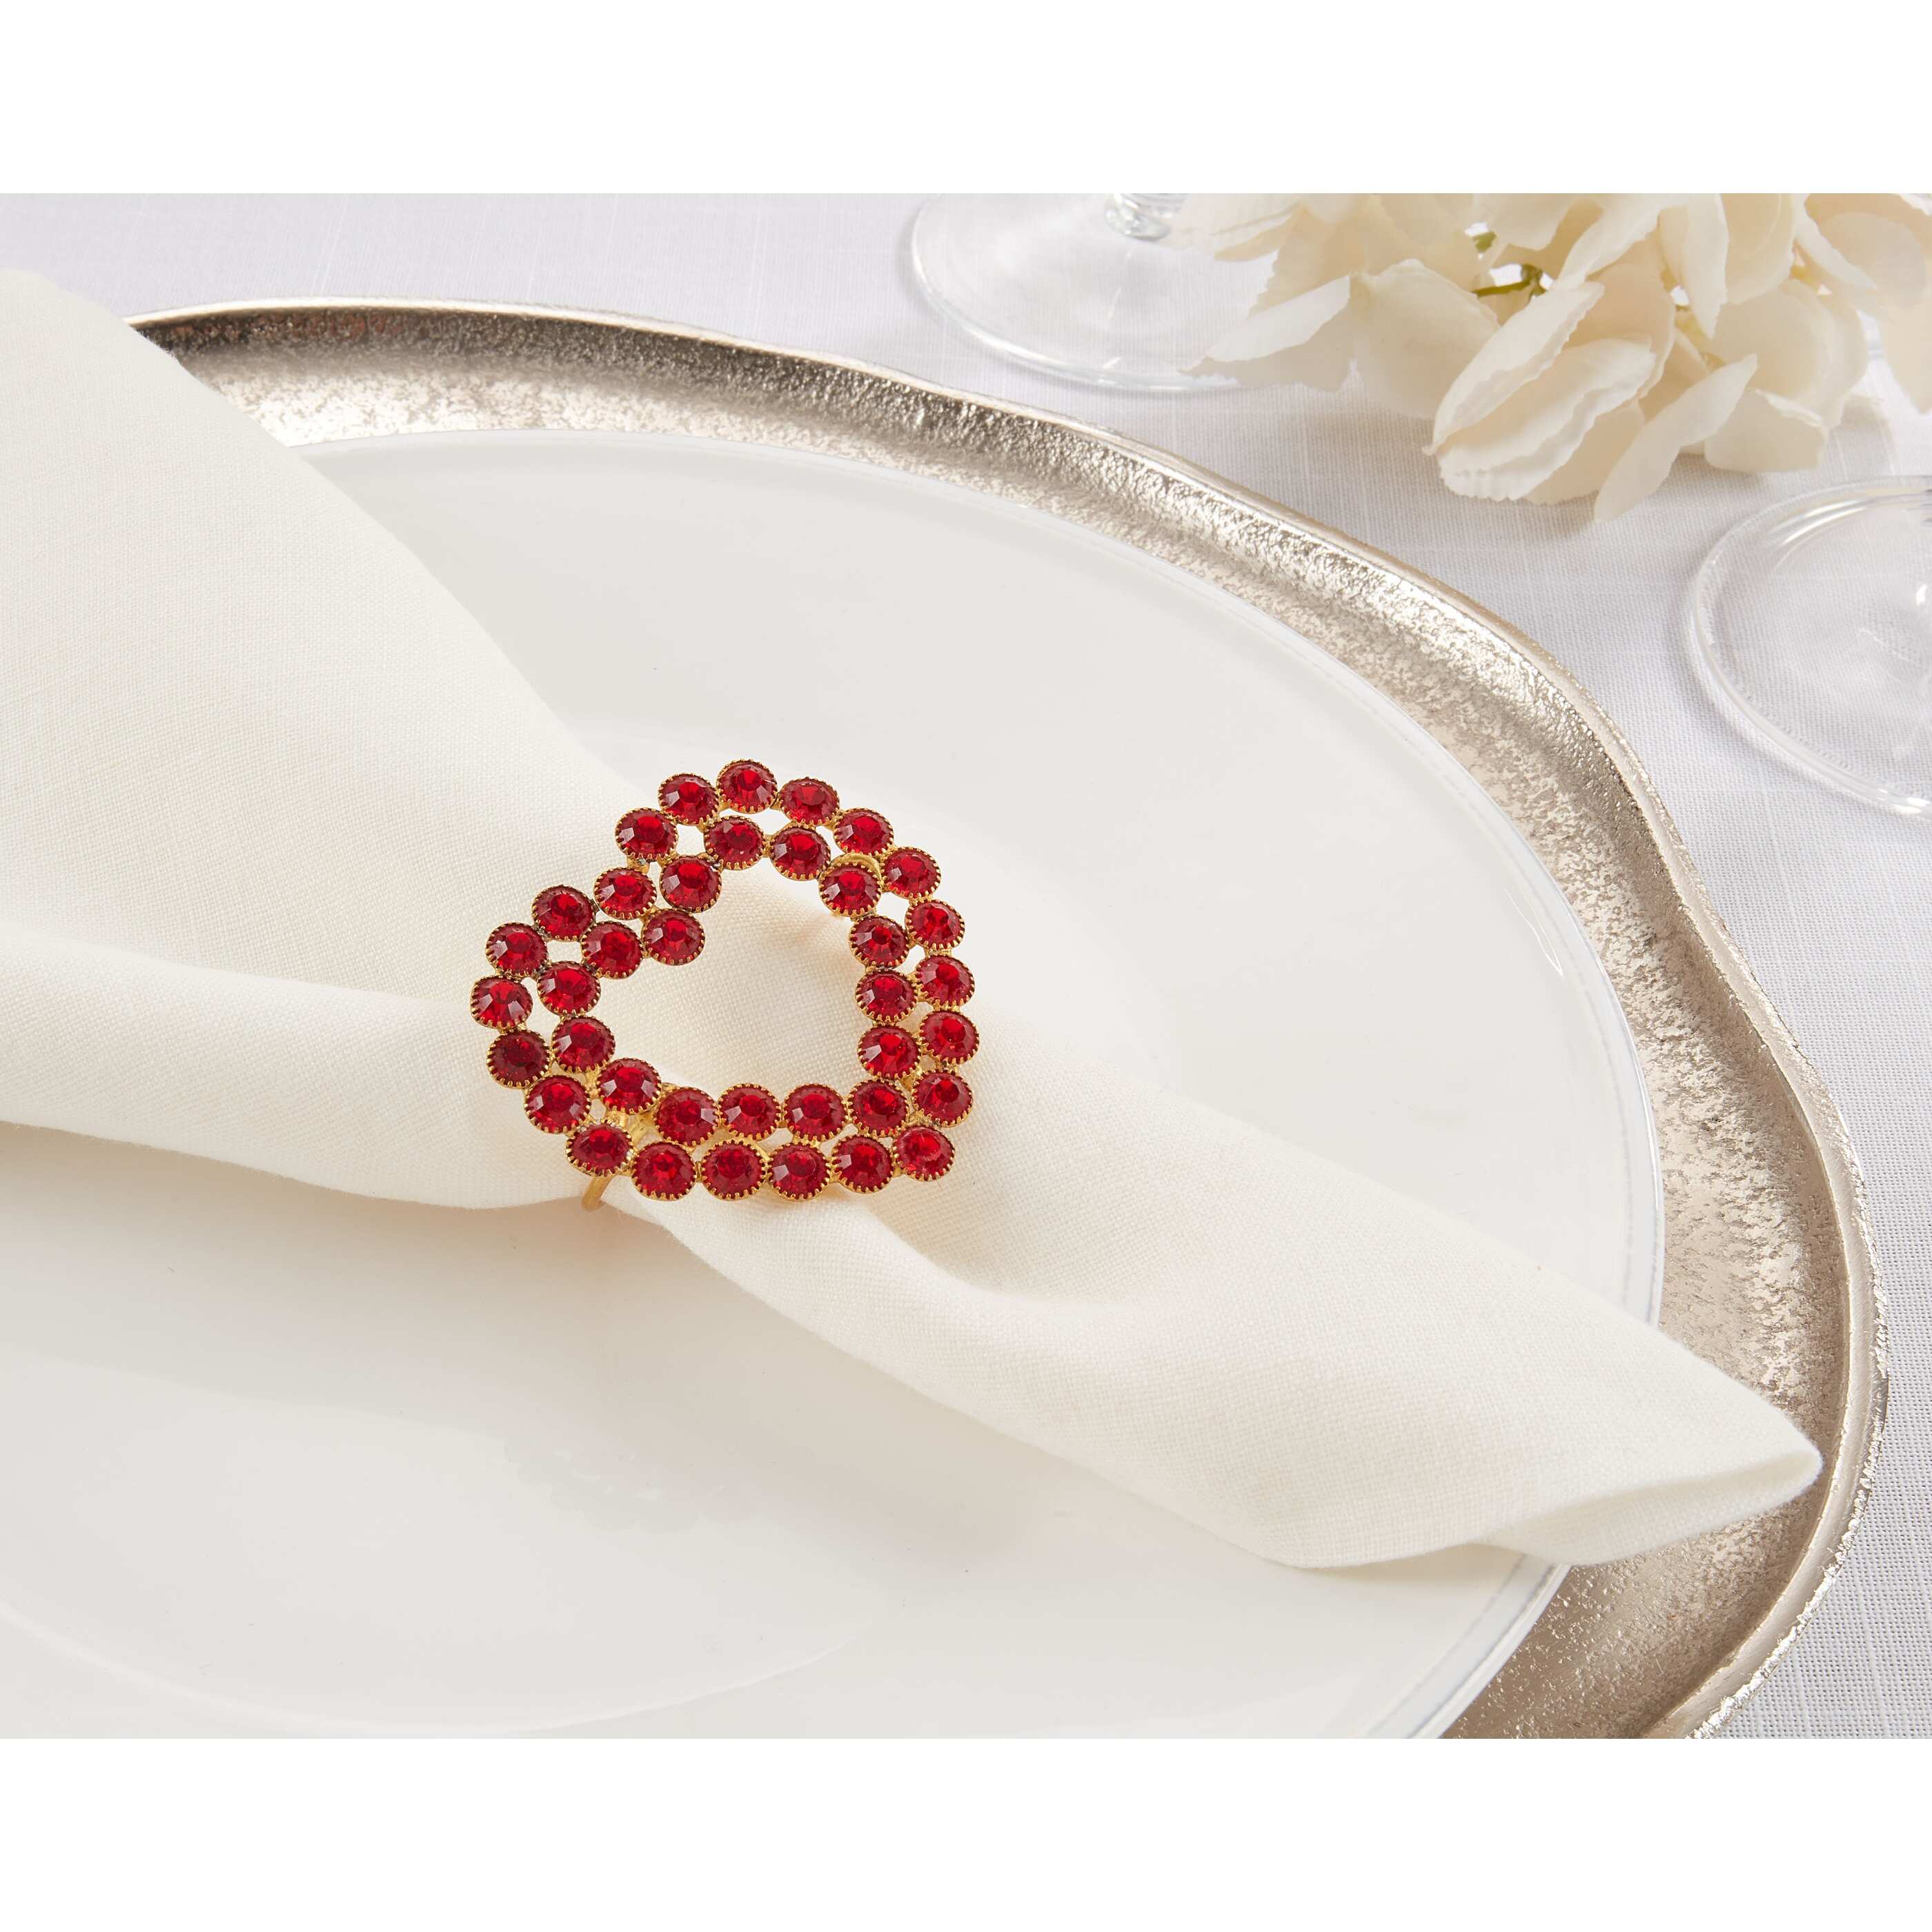 Beaded Napkin Rings With Heart Design (Set of 4)